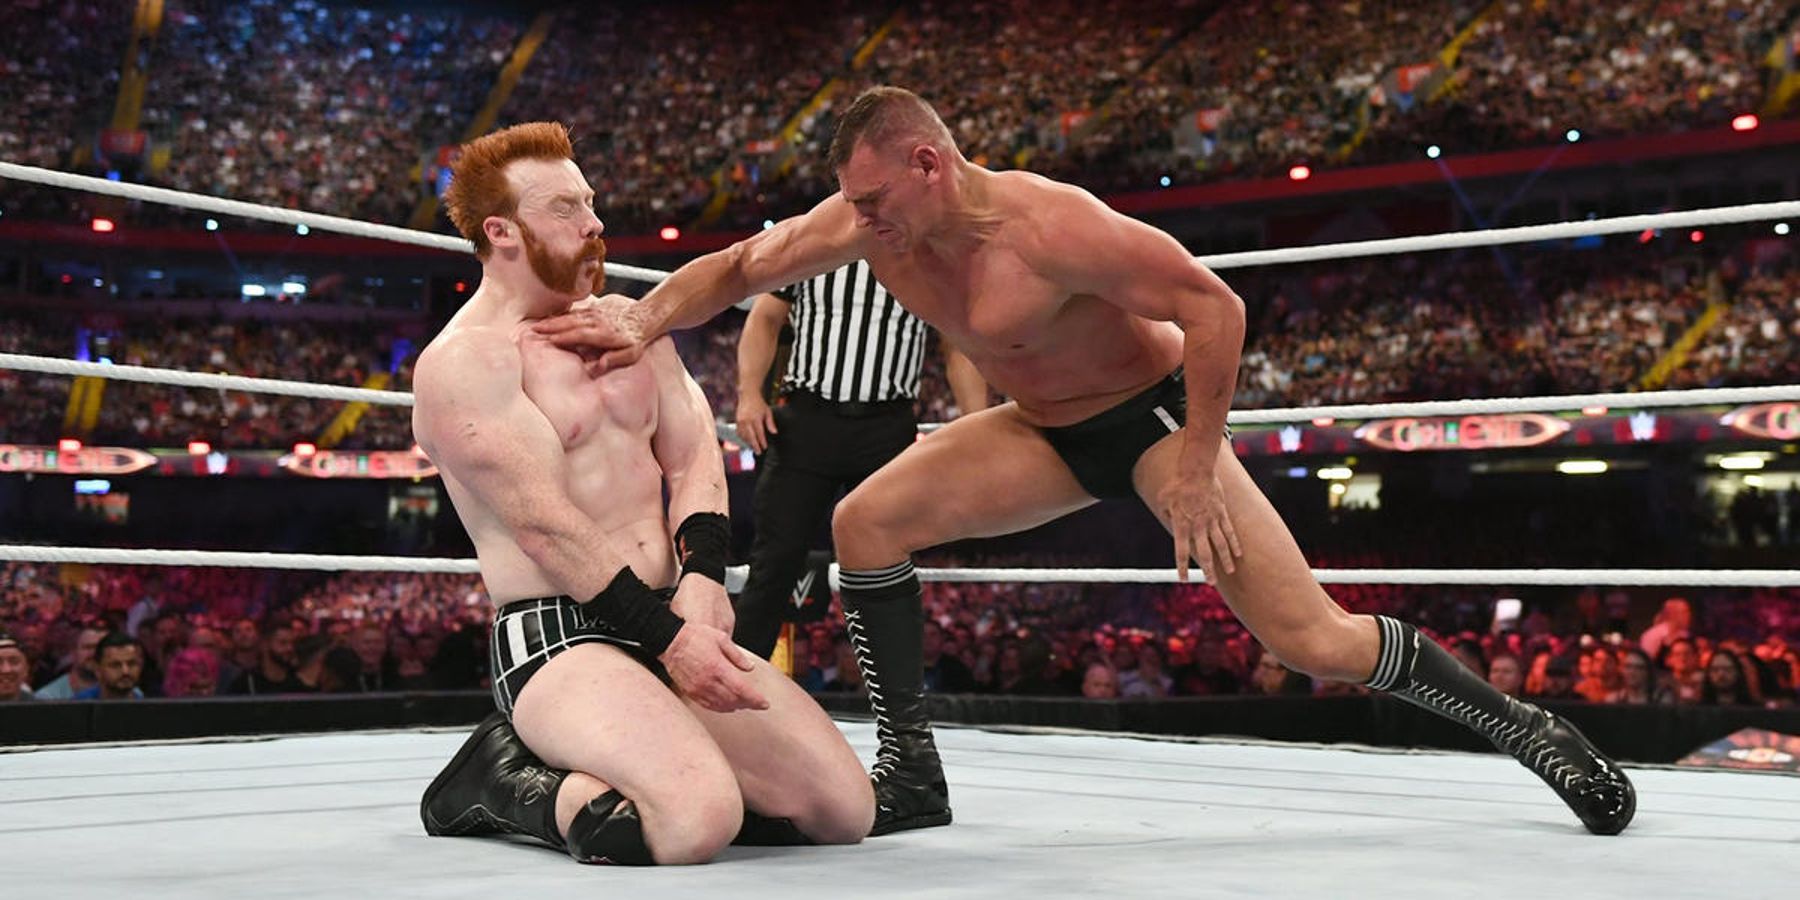 Gunther lays a hard chop on Sheamus during their match at WWE Clash At The Castle in 2022.